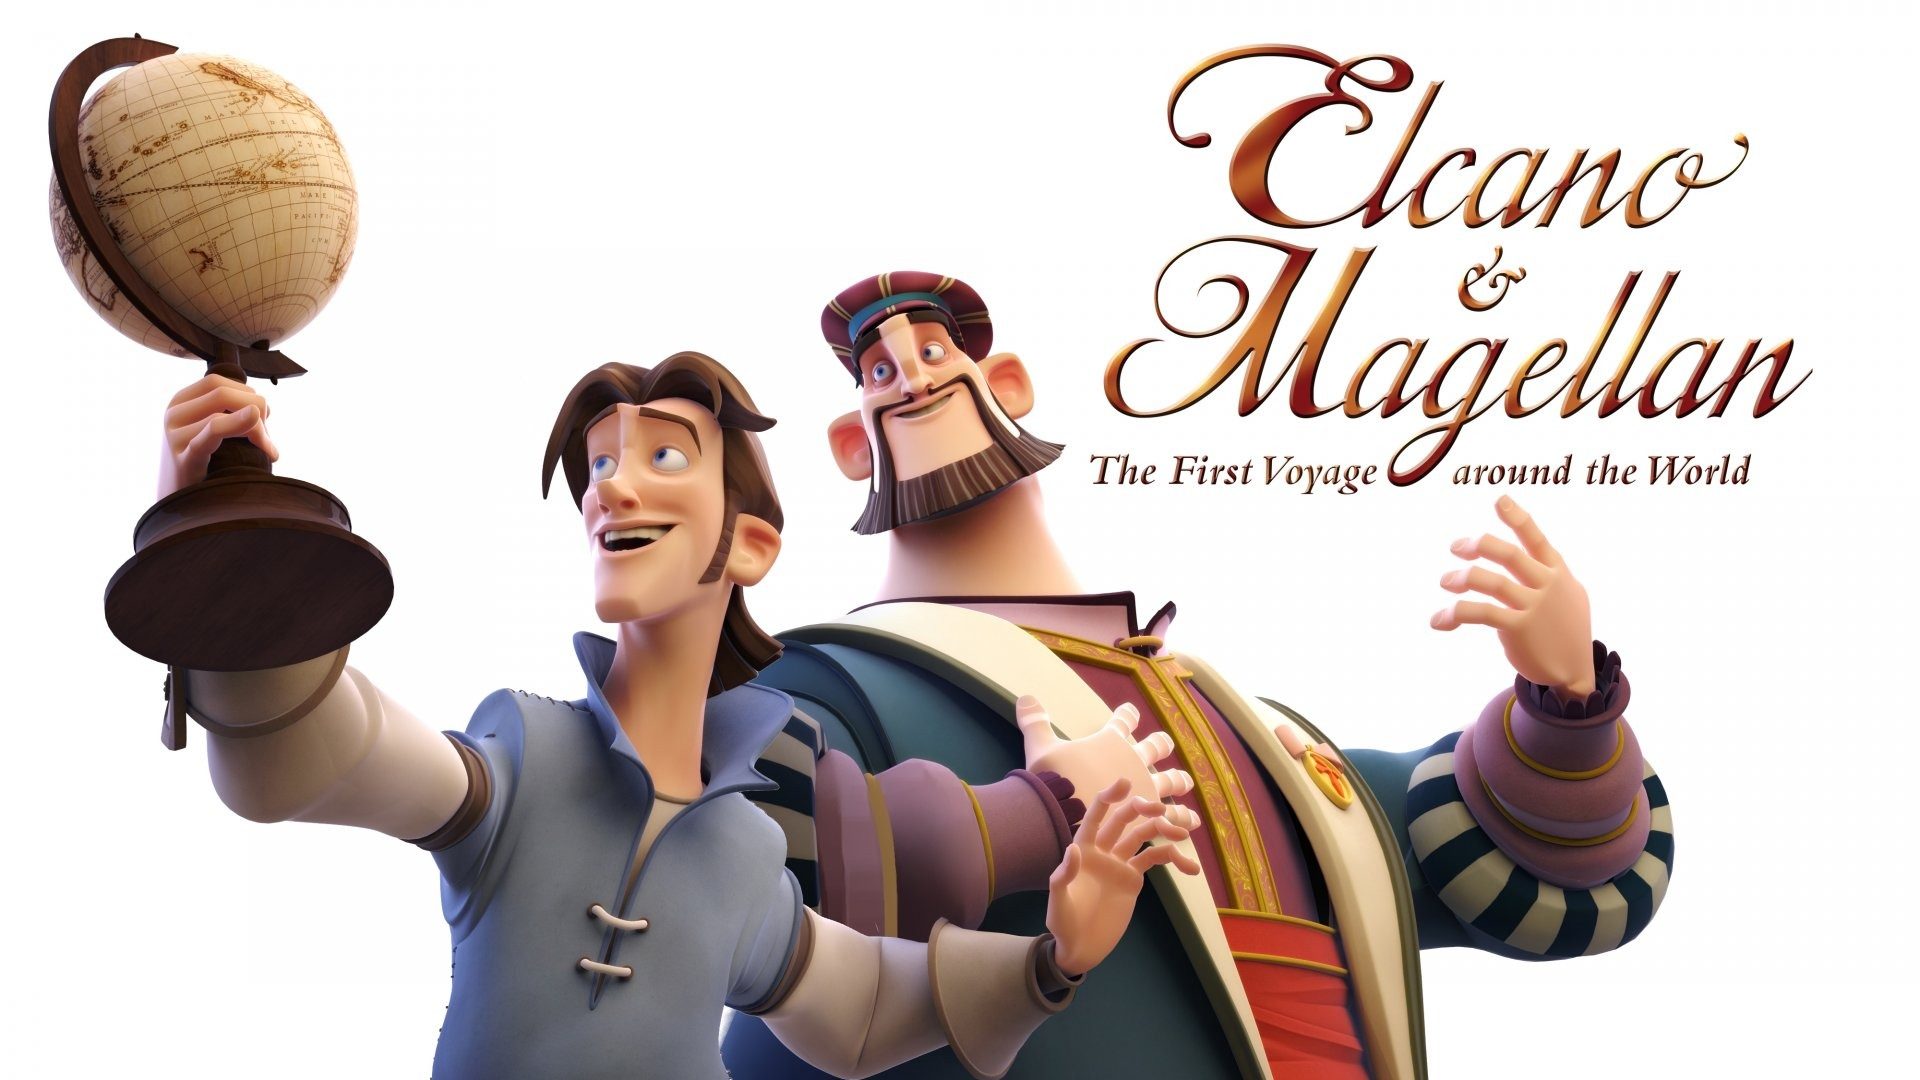 CrystalSky Multimedia to ‘reevaluate’ the release of ‘Elcano and Magellan’ film in PH